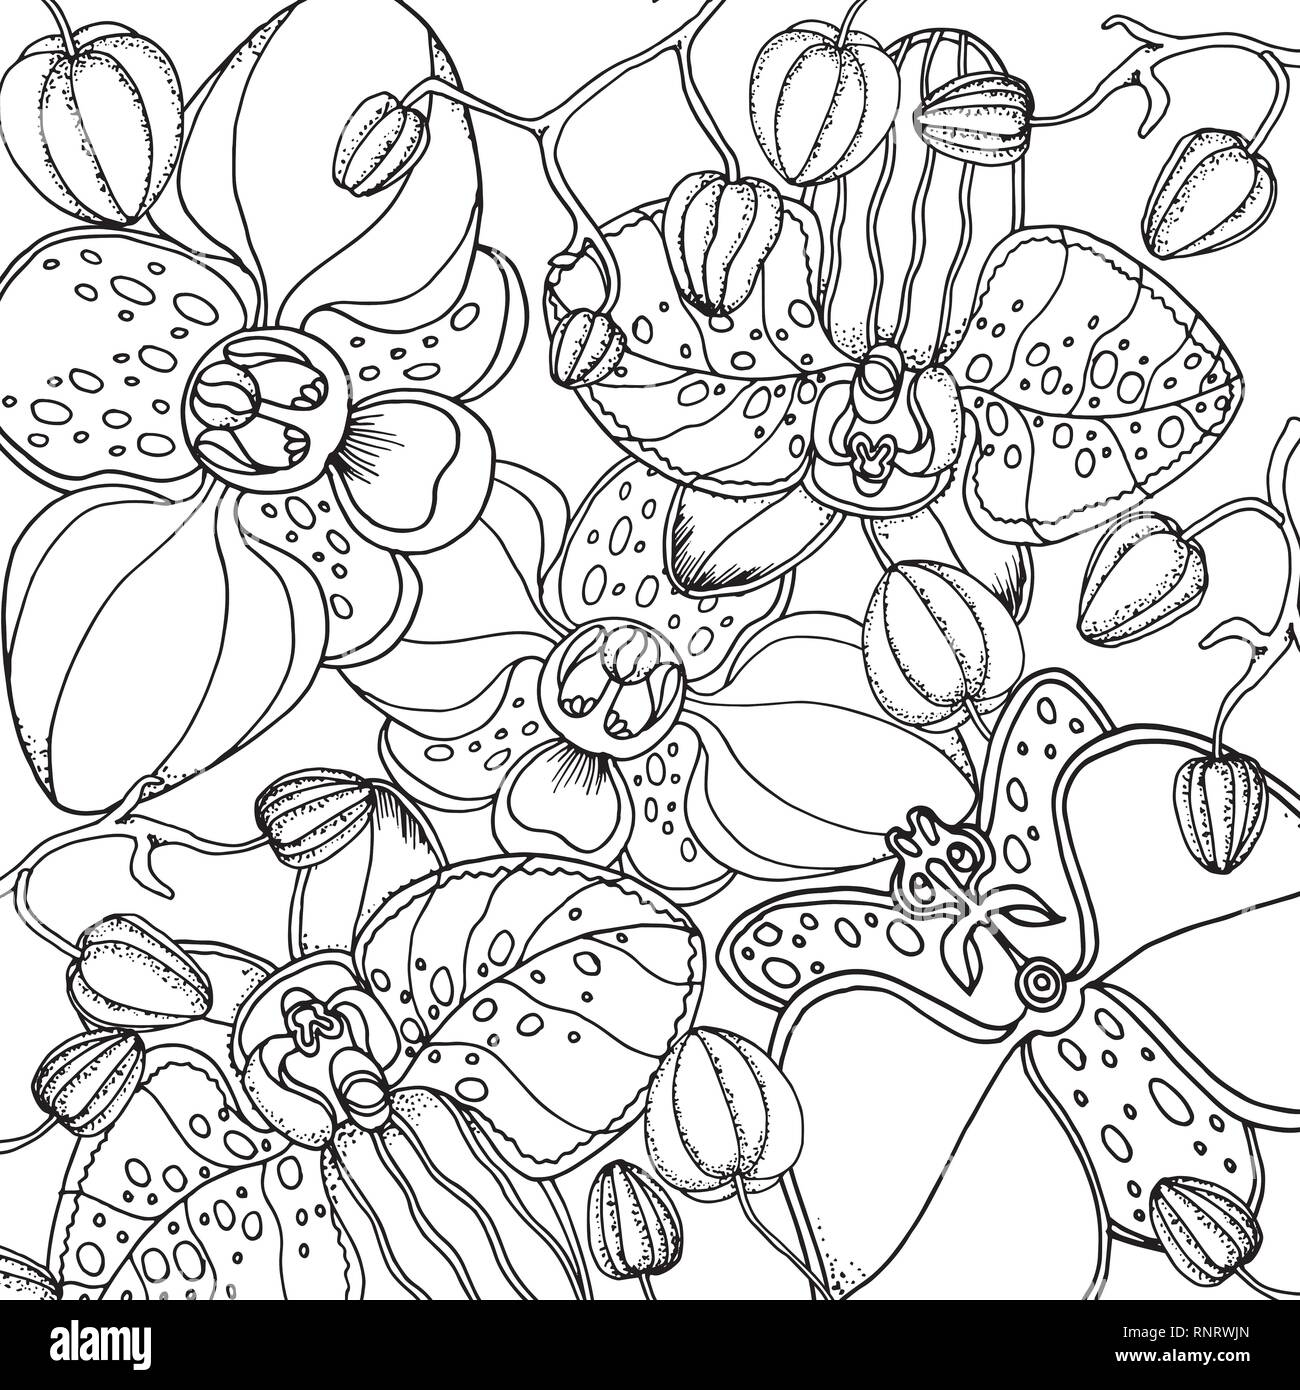 Doodle floral background in vector with doodles black and white coloring page Stock Vector